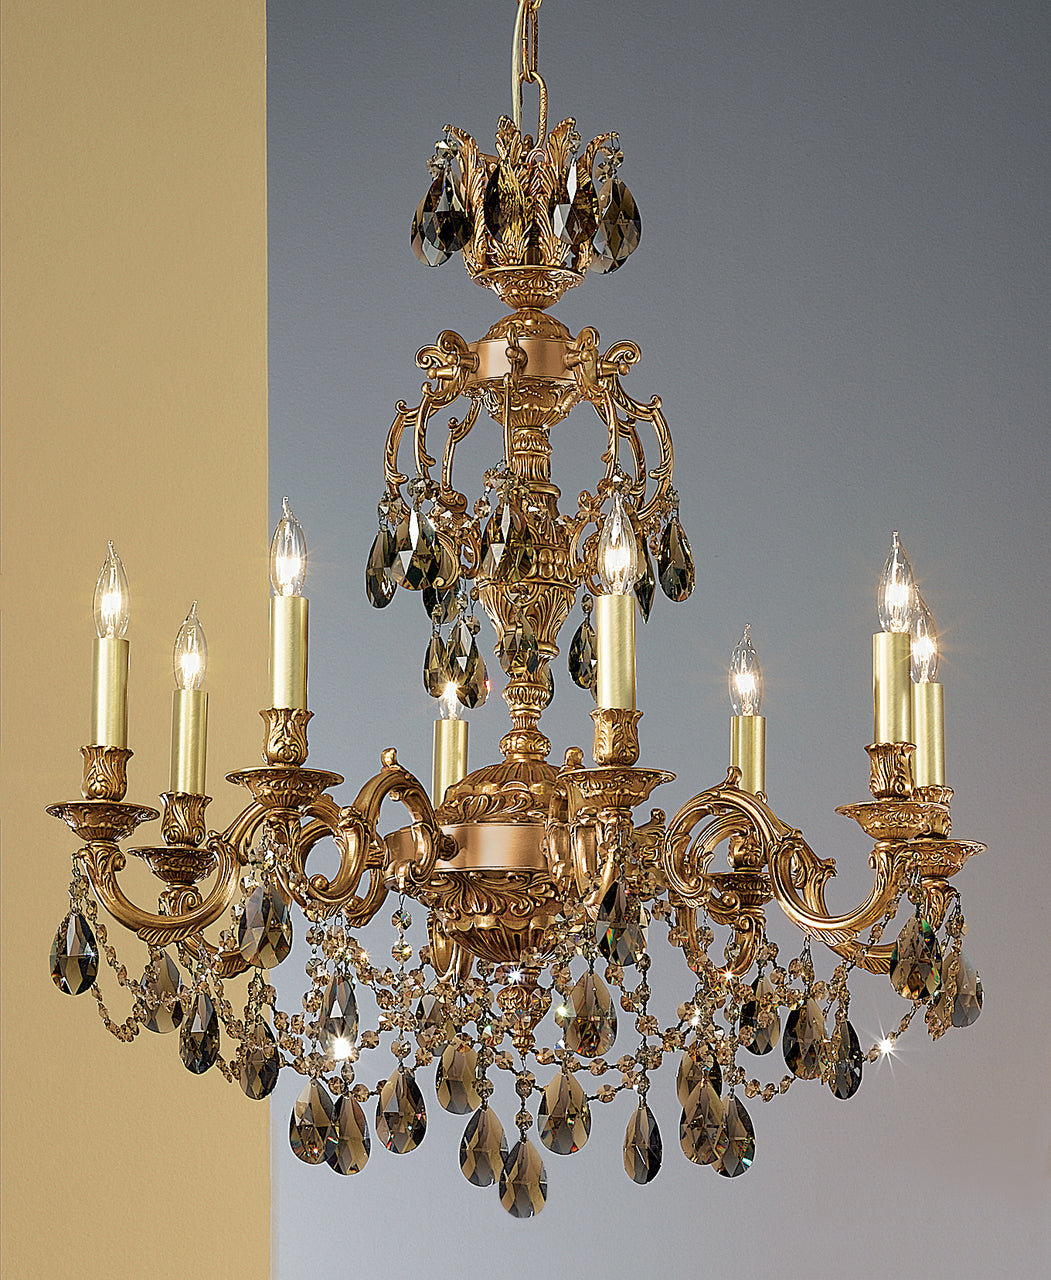 Classic Lighting 57388 FG SC Chateau Imperial Crystal Chandelier in French Gold (Imported from Spain)